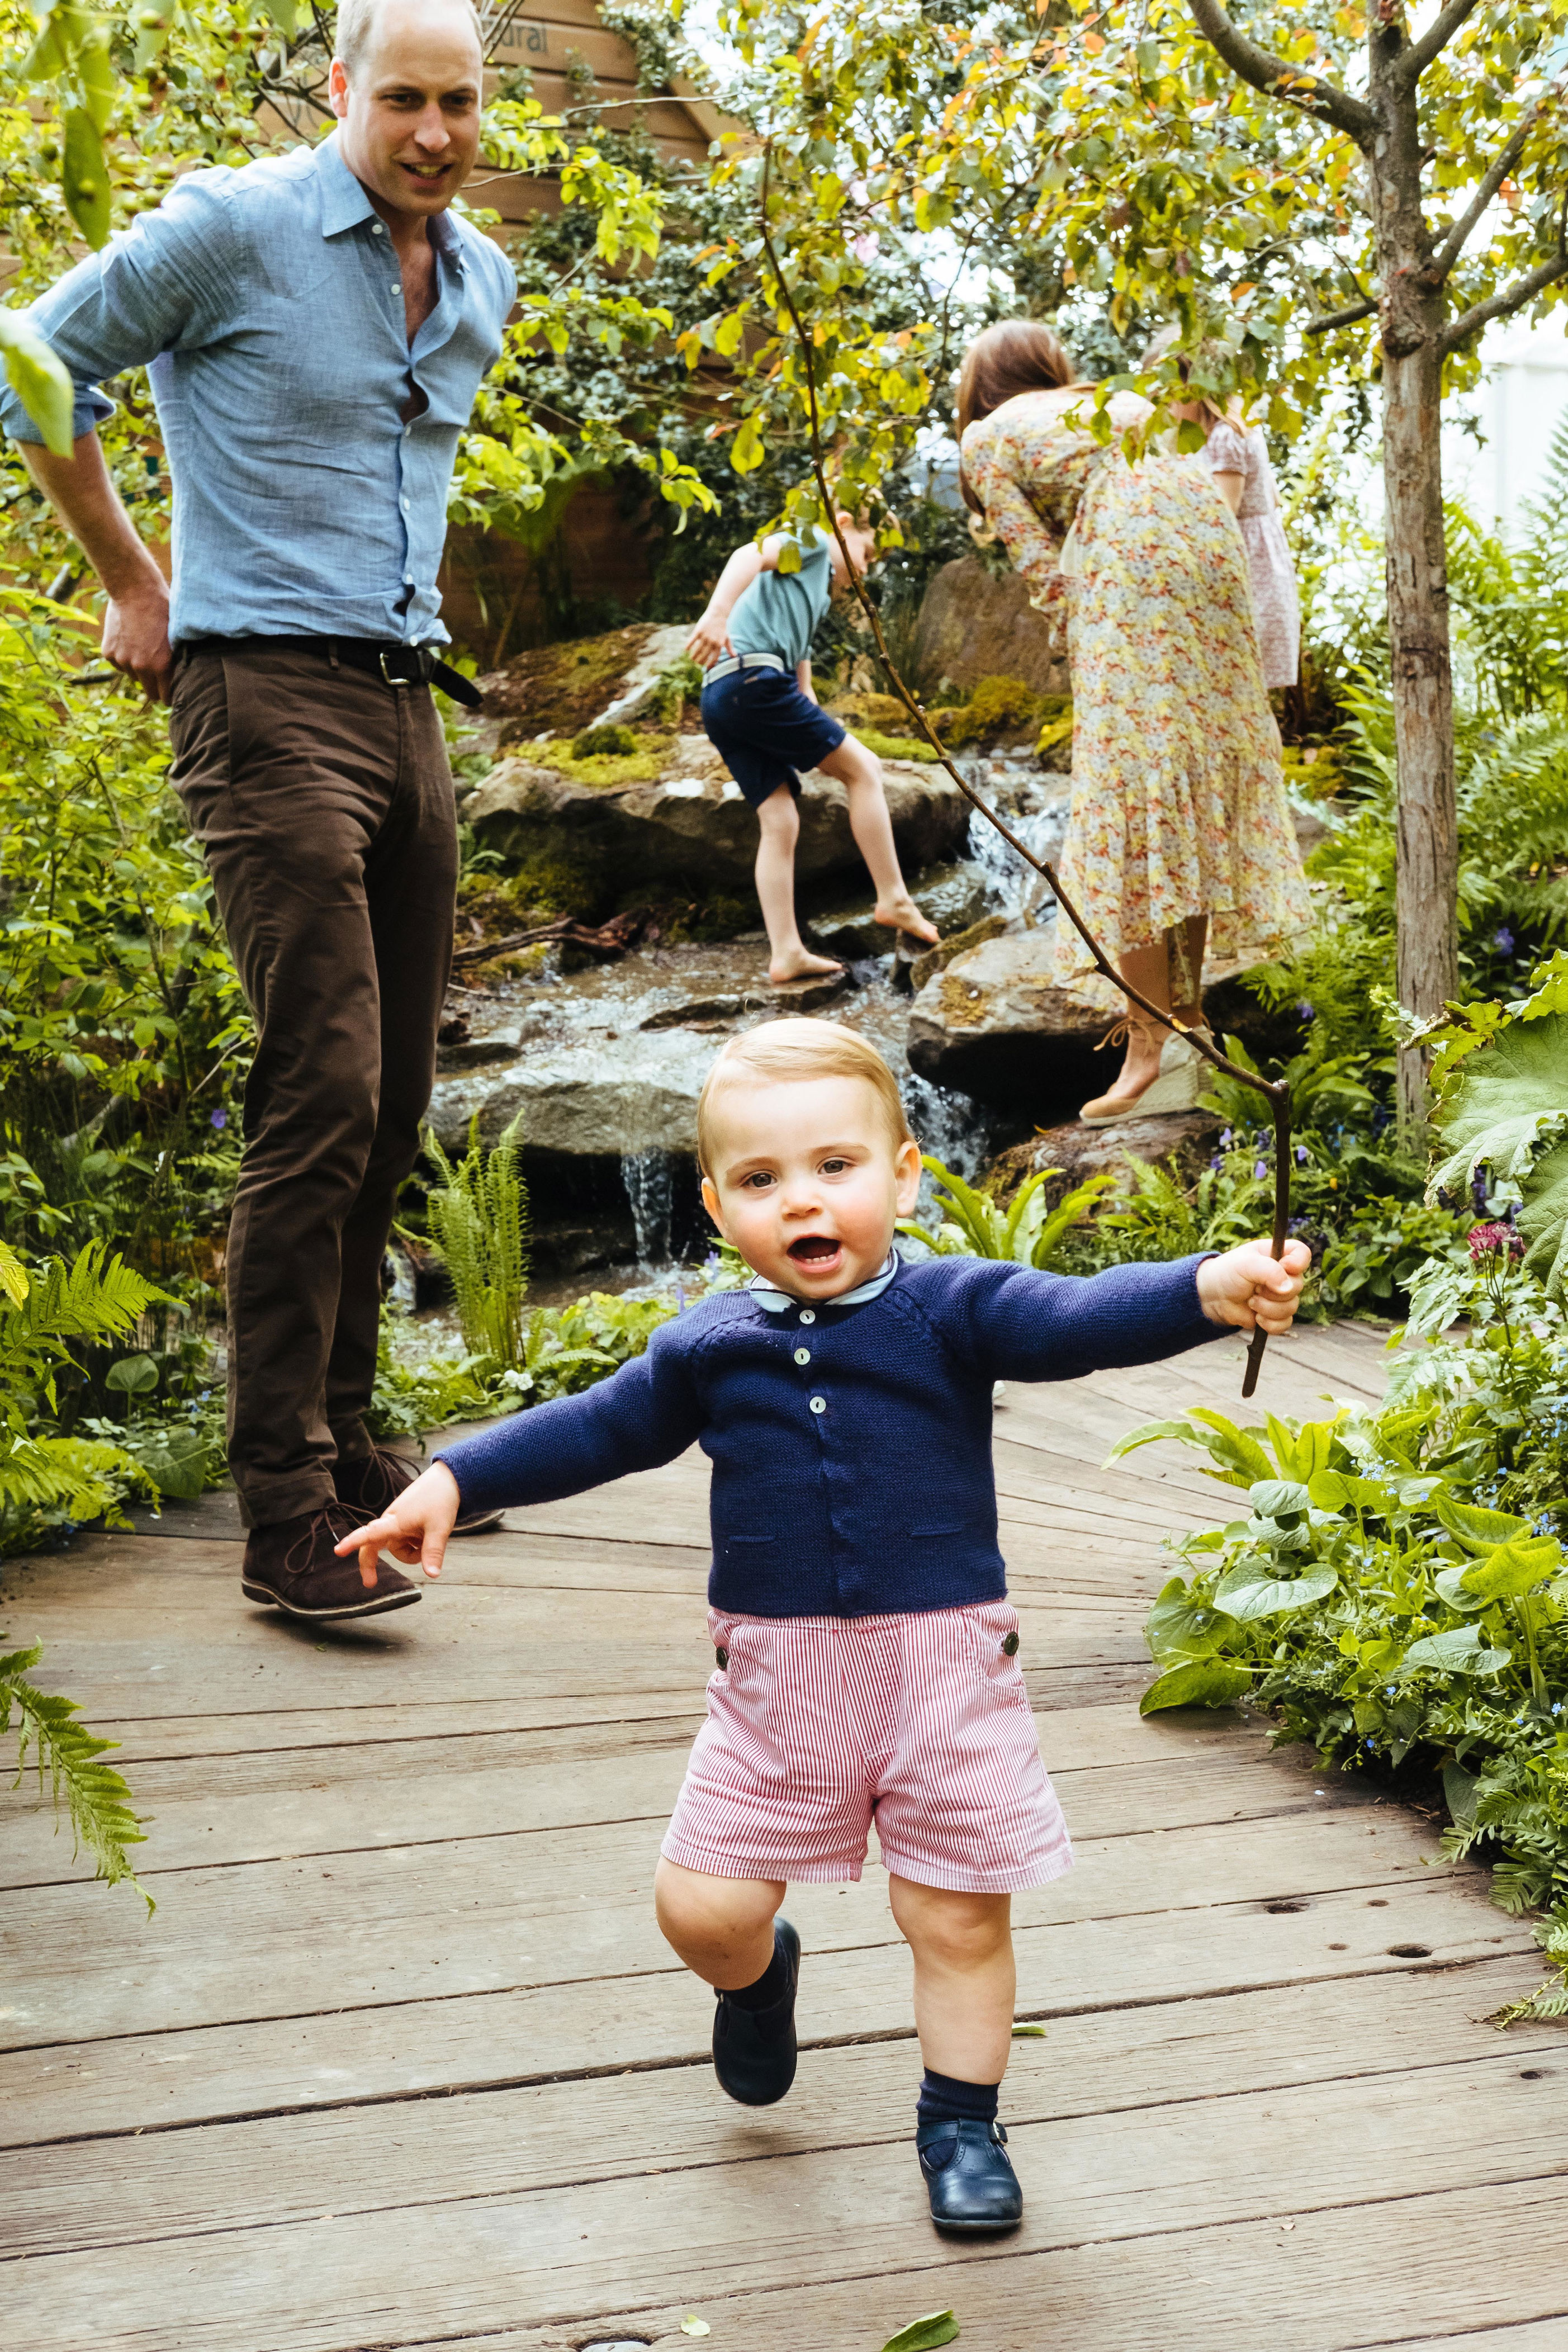 <p>Dad <a href="https://www.wonderwall.com/celebrity/profiles/overview/prince-william-482.article">Prince William</a> watched as new walker Prince Louis explored the garden <a href="https://www.wonderwall.com/celebrity/profiles/overview/duchess-kate-1356.article">Duchess Kate</a> co-designed with Adam White and Andree Davies for the RHS Chelsea Flower Show in London on May 19, 2019.</p>